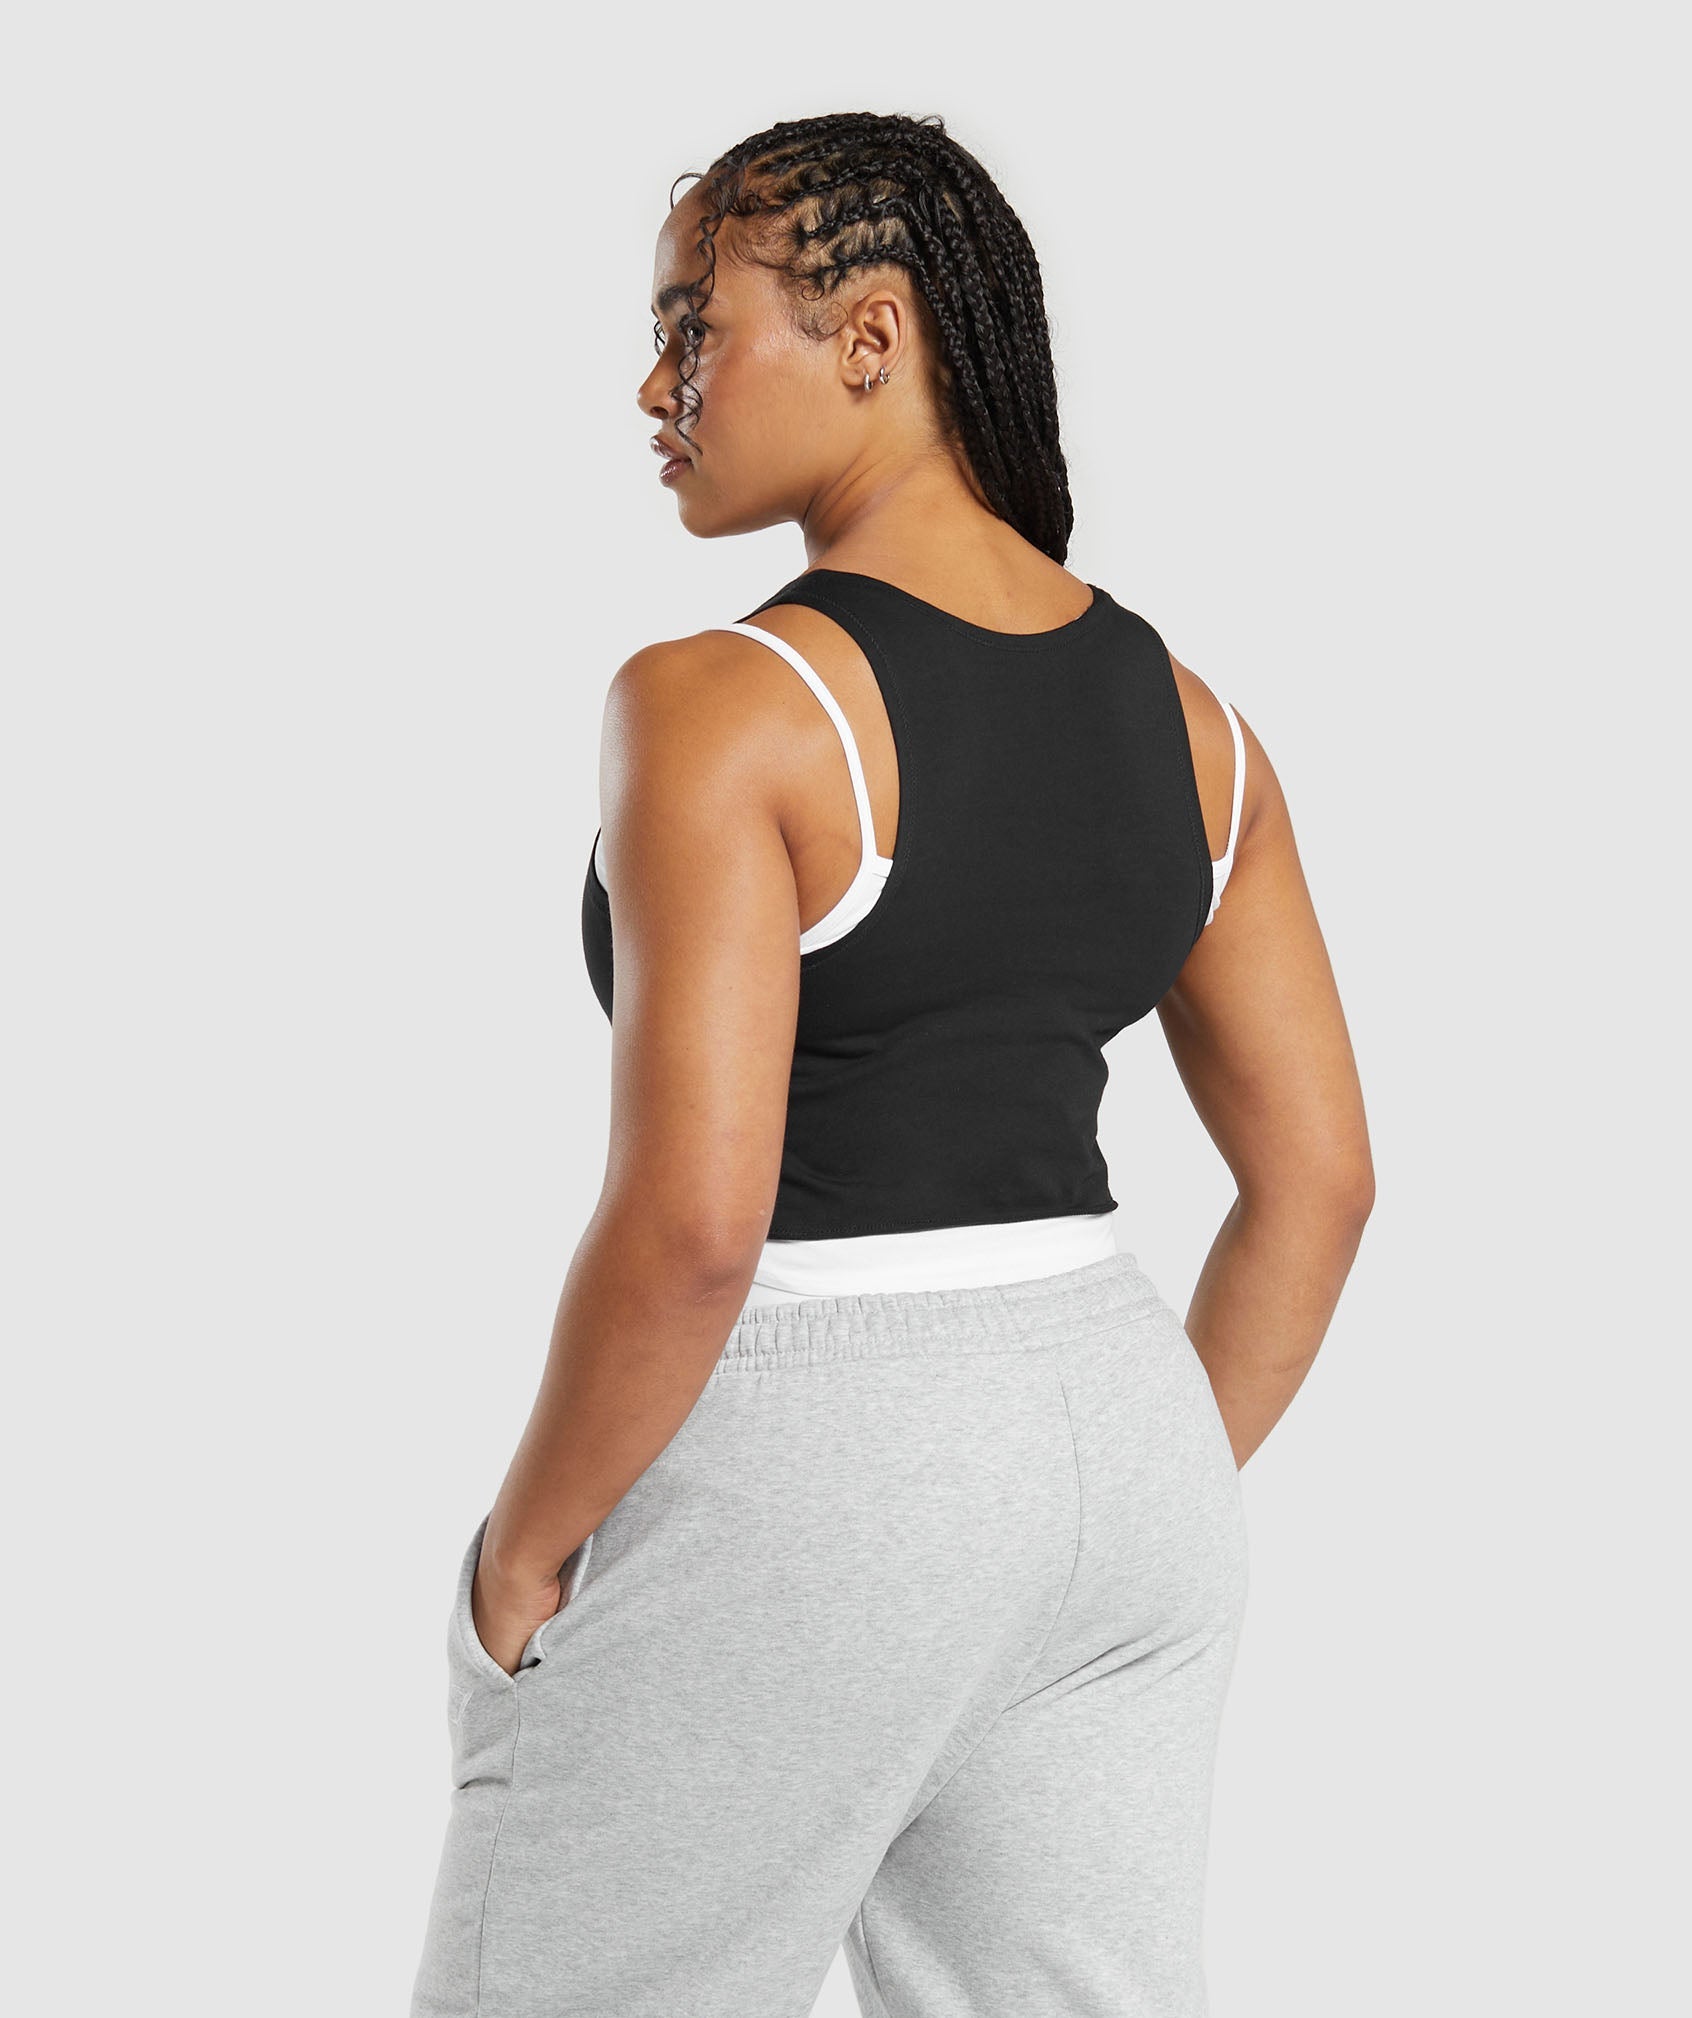 Lifting 2 In 1 Crop Tank in White/Black - view 2